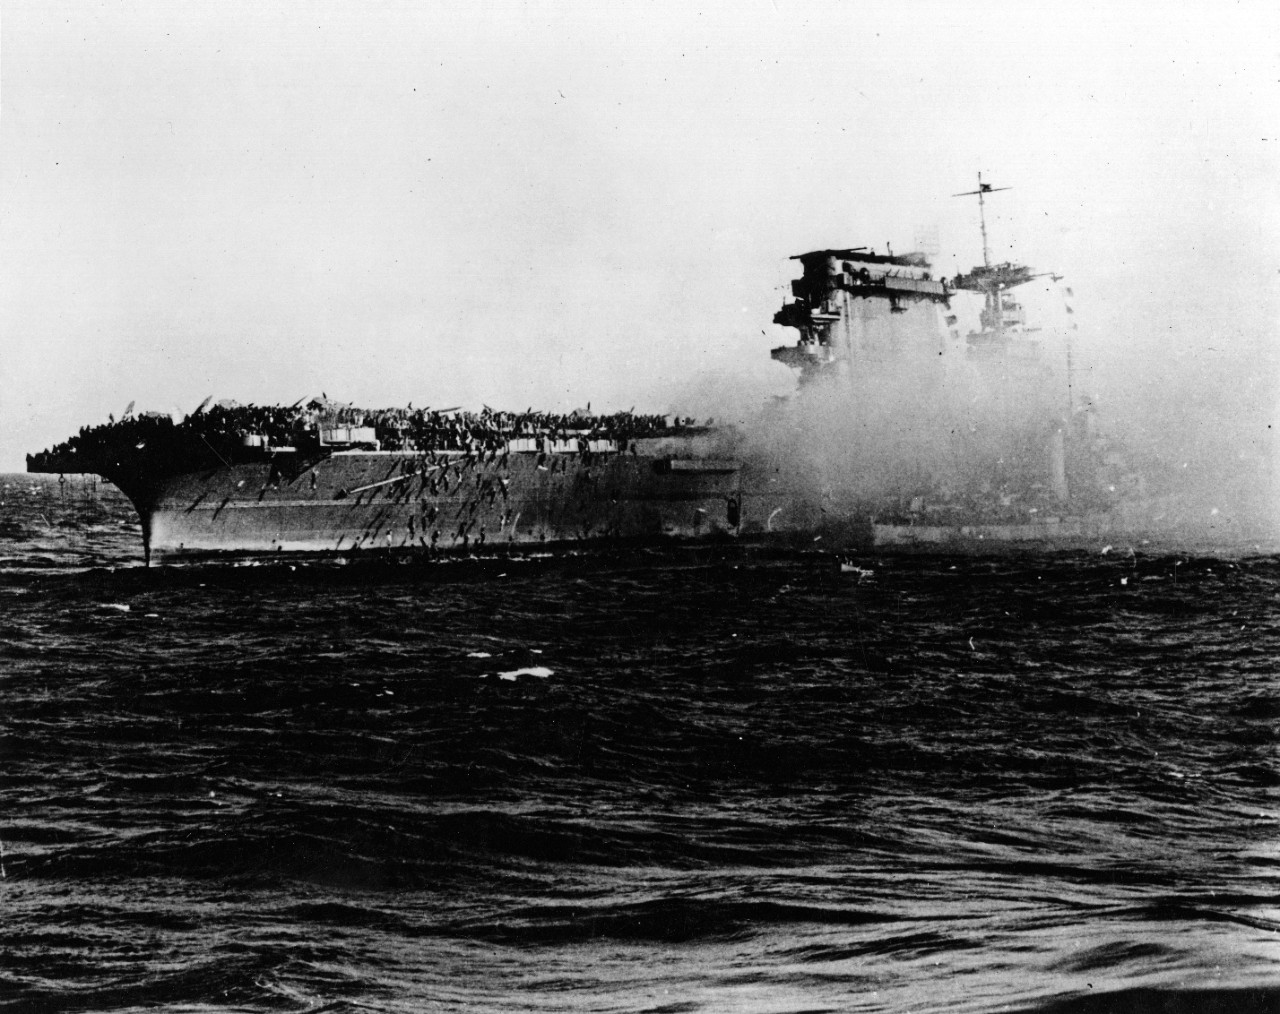 Photo #: 80-G-7398  Battle of the Coral Sea, May 1942